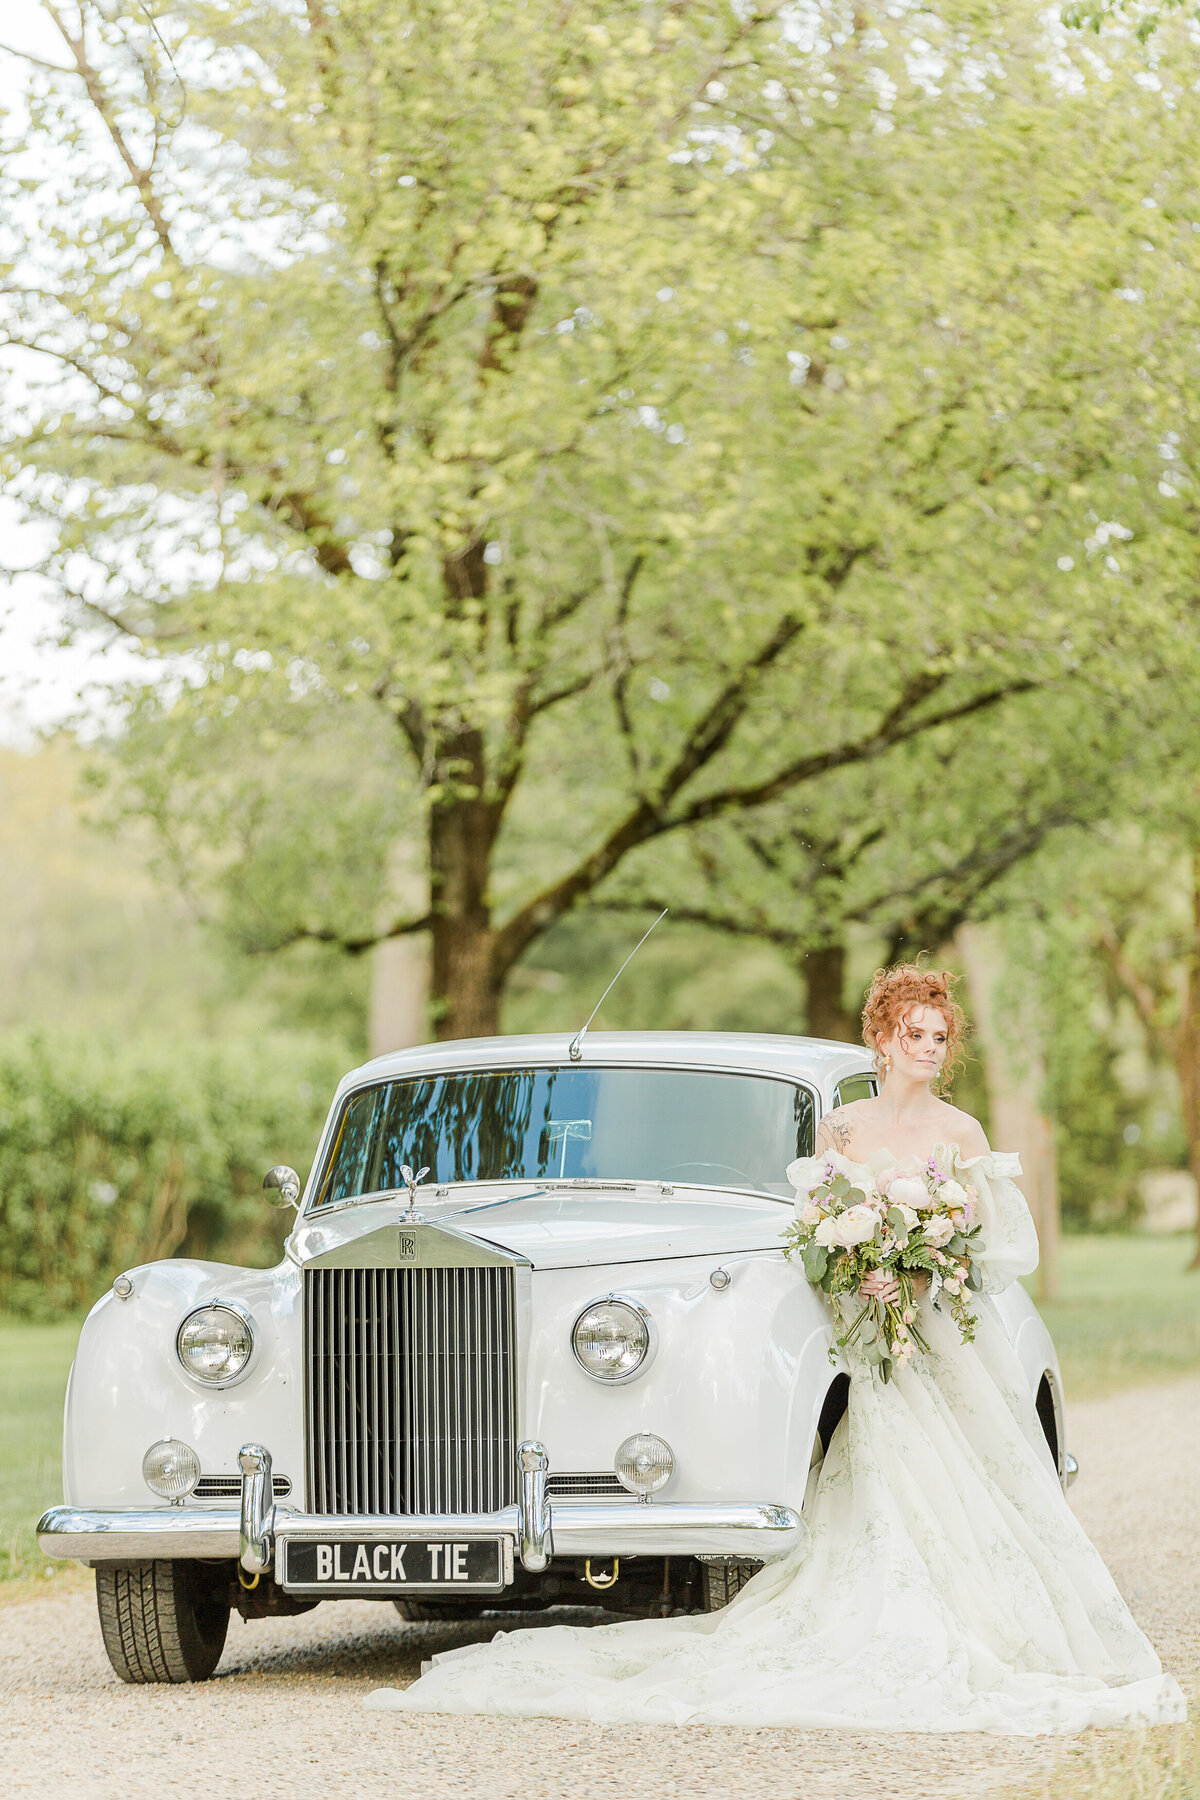 A bride stands in front of a vintage rolls royce for a stunning bridal portrait. She is holding her large blush bouquet in front of her and looking over her shoulder in the distance. Captured by Lia Rose Weddings, New England Wedding Photographer.